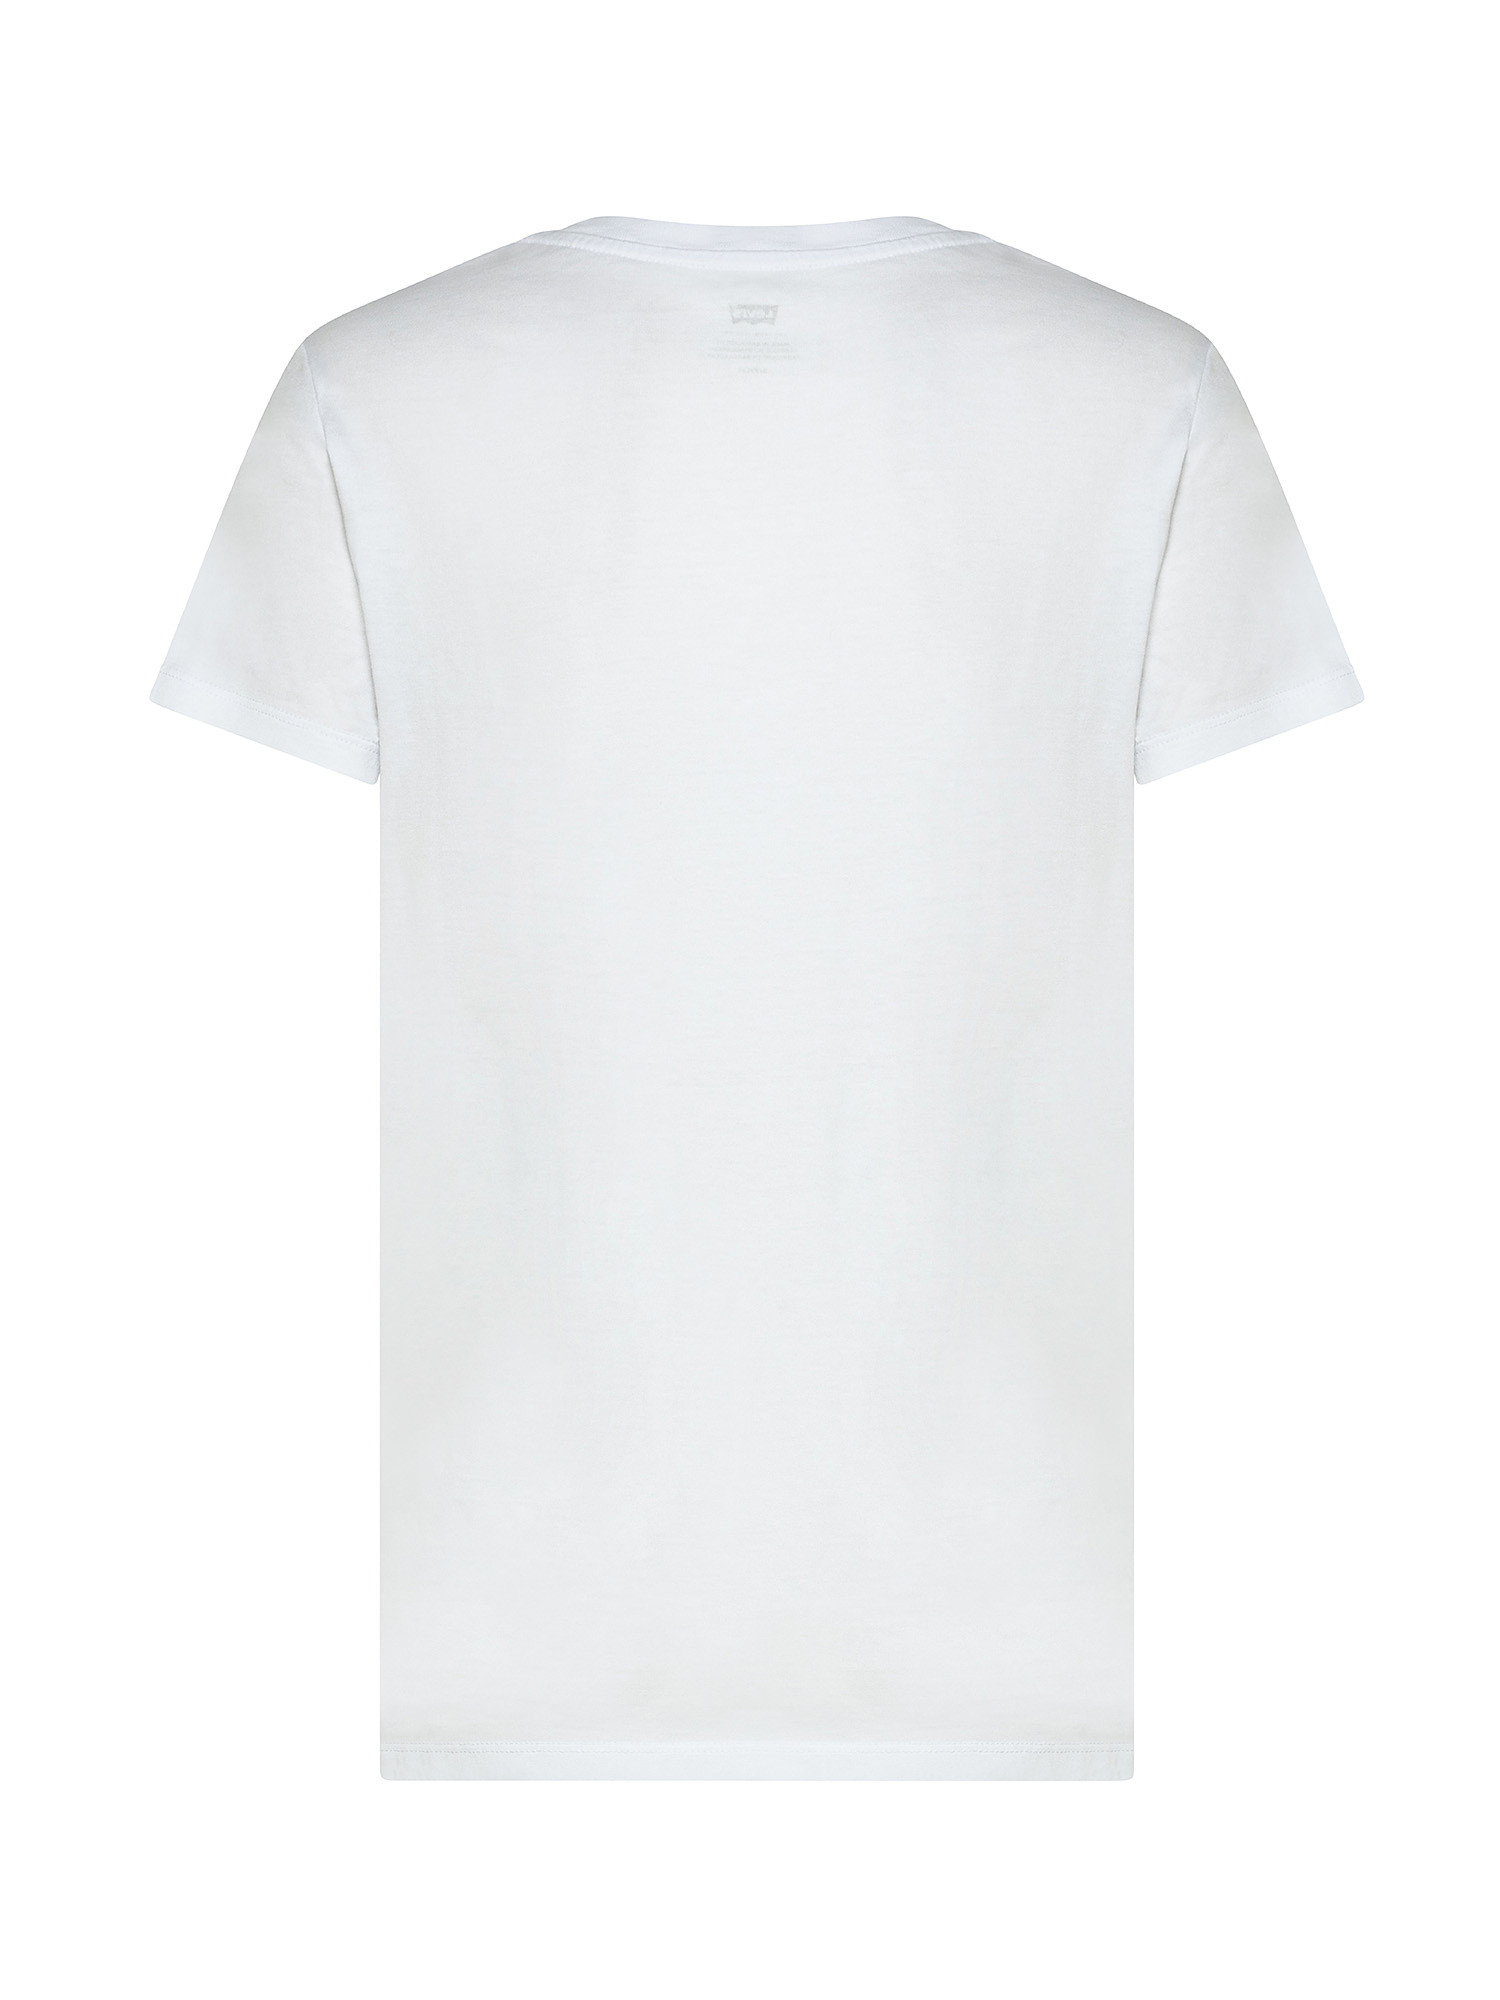 T-shirt Perfect Tee, Bianco, large image number 1